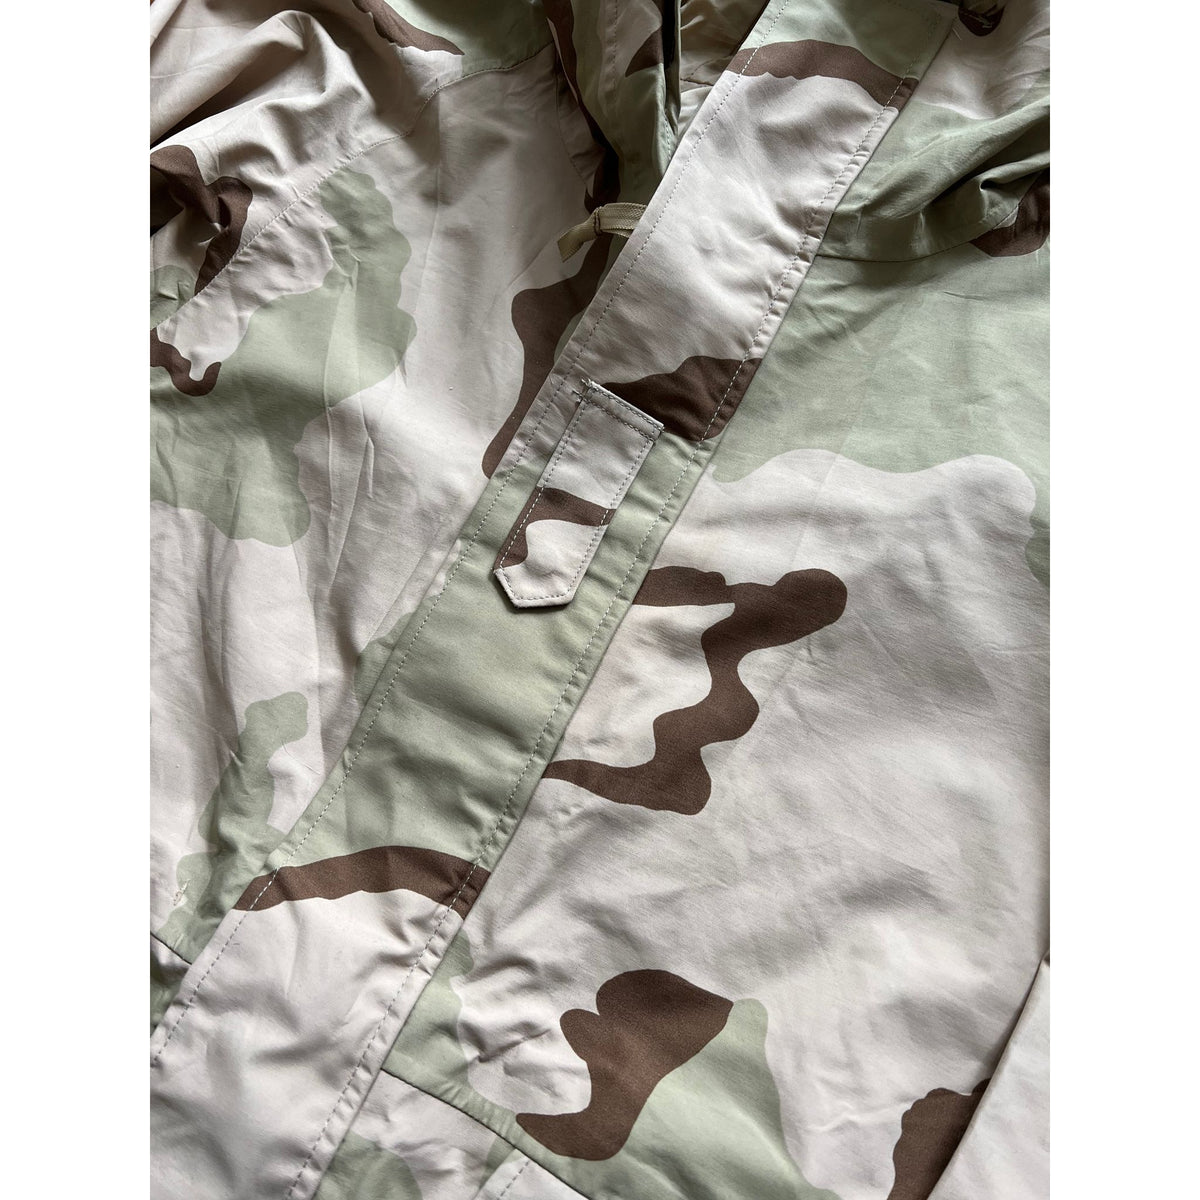 U.S. Military ECWCS Cold Weather Desert Camouflage Gore-Tex